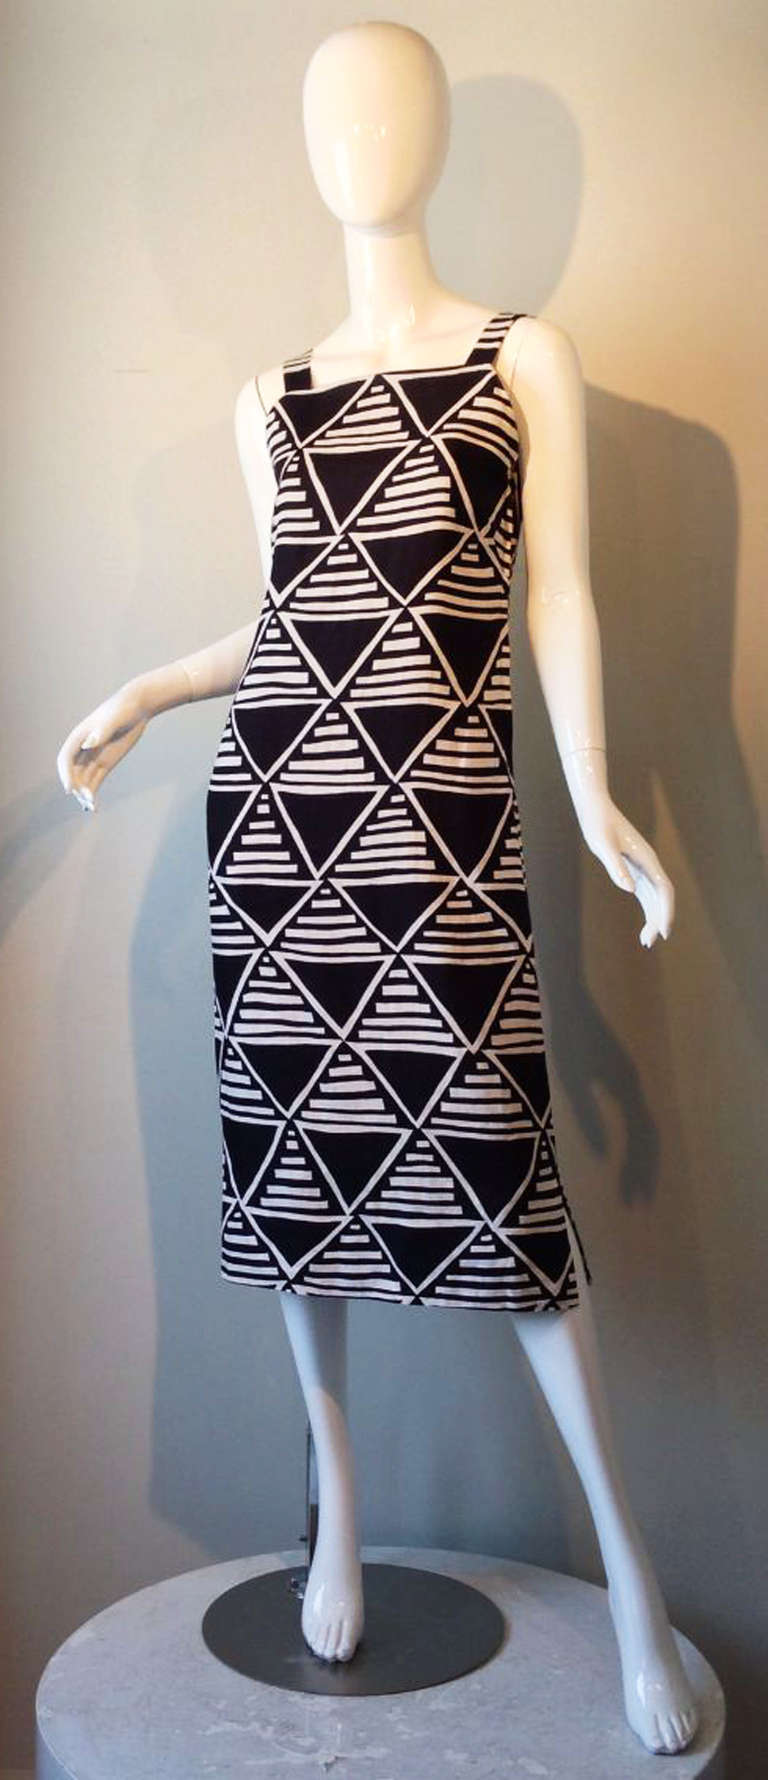 A fine vintage Pauline Trigere graphic print afternoon dress. Black and white linen weave item fully lined and buttons back shoulder straps. Pristine, appears unworn.